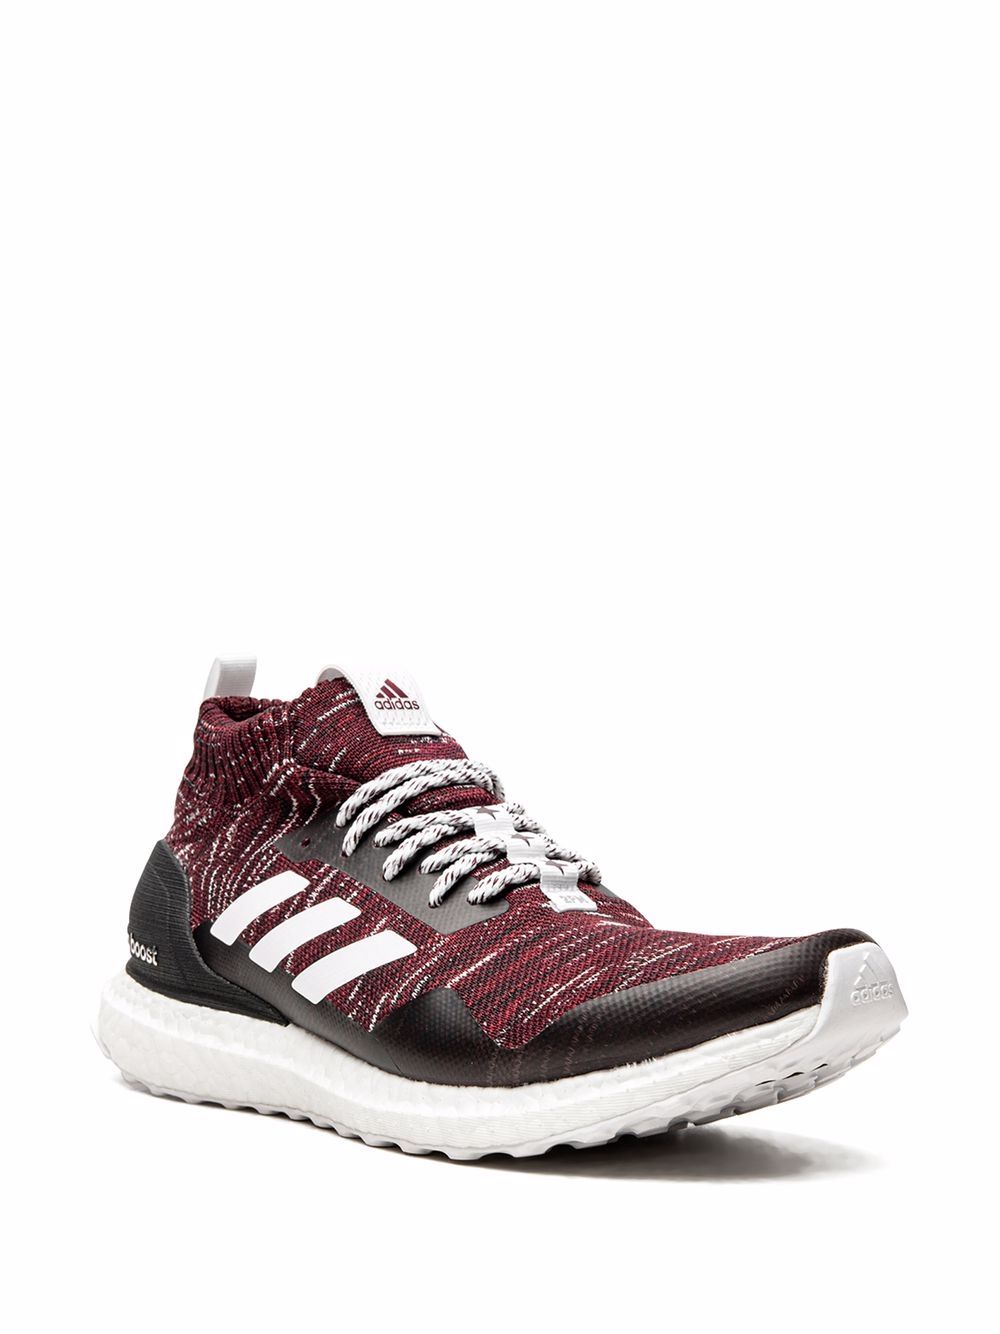 adidas x Pat Mahome Ultraboost DNA Mid sneakers - Bruin